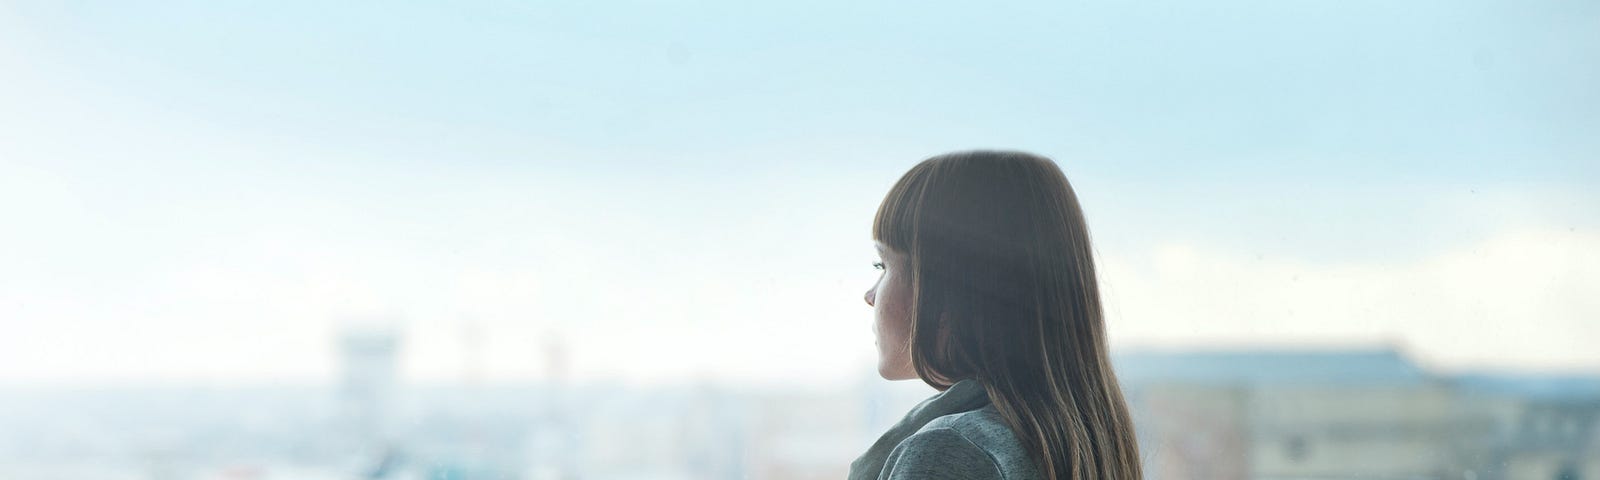 A young woman in profile, gazing out the airport’s large window at the planes outside.